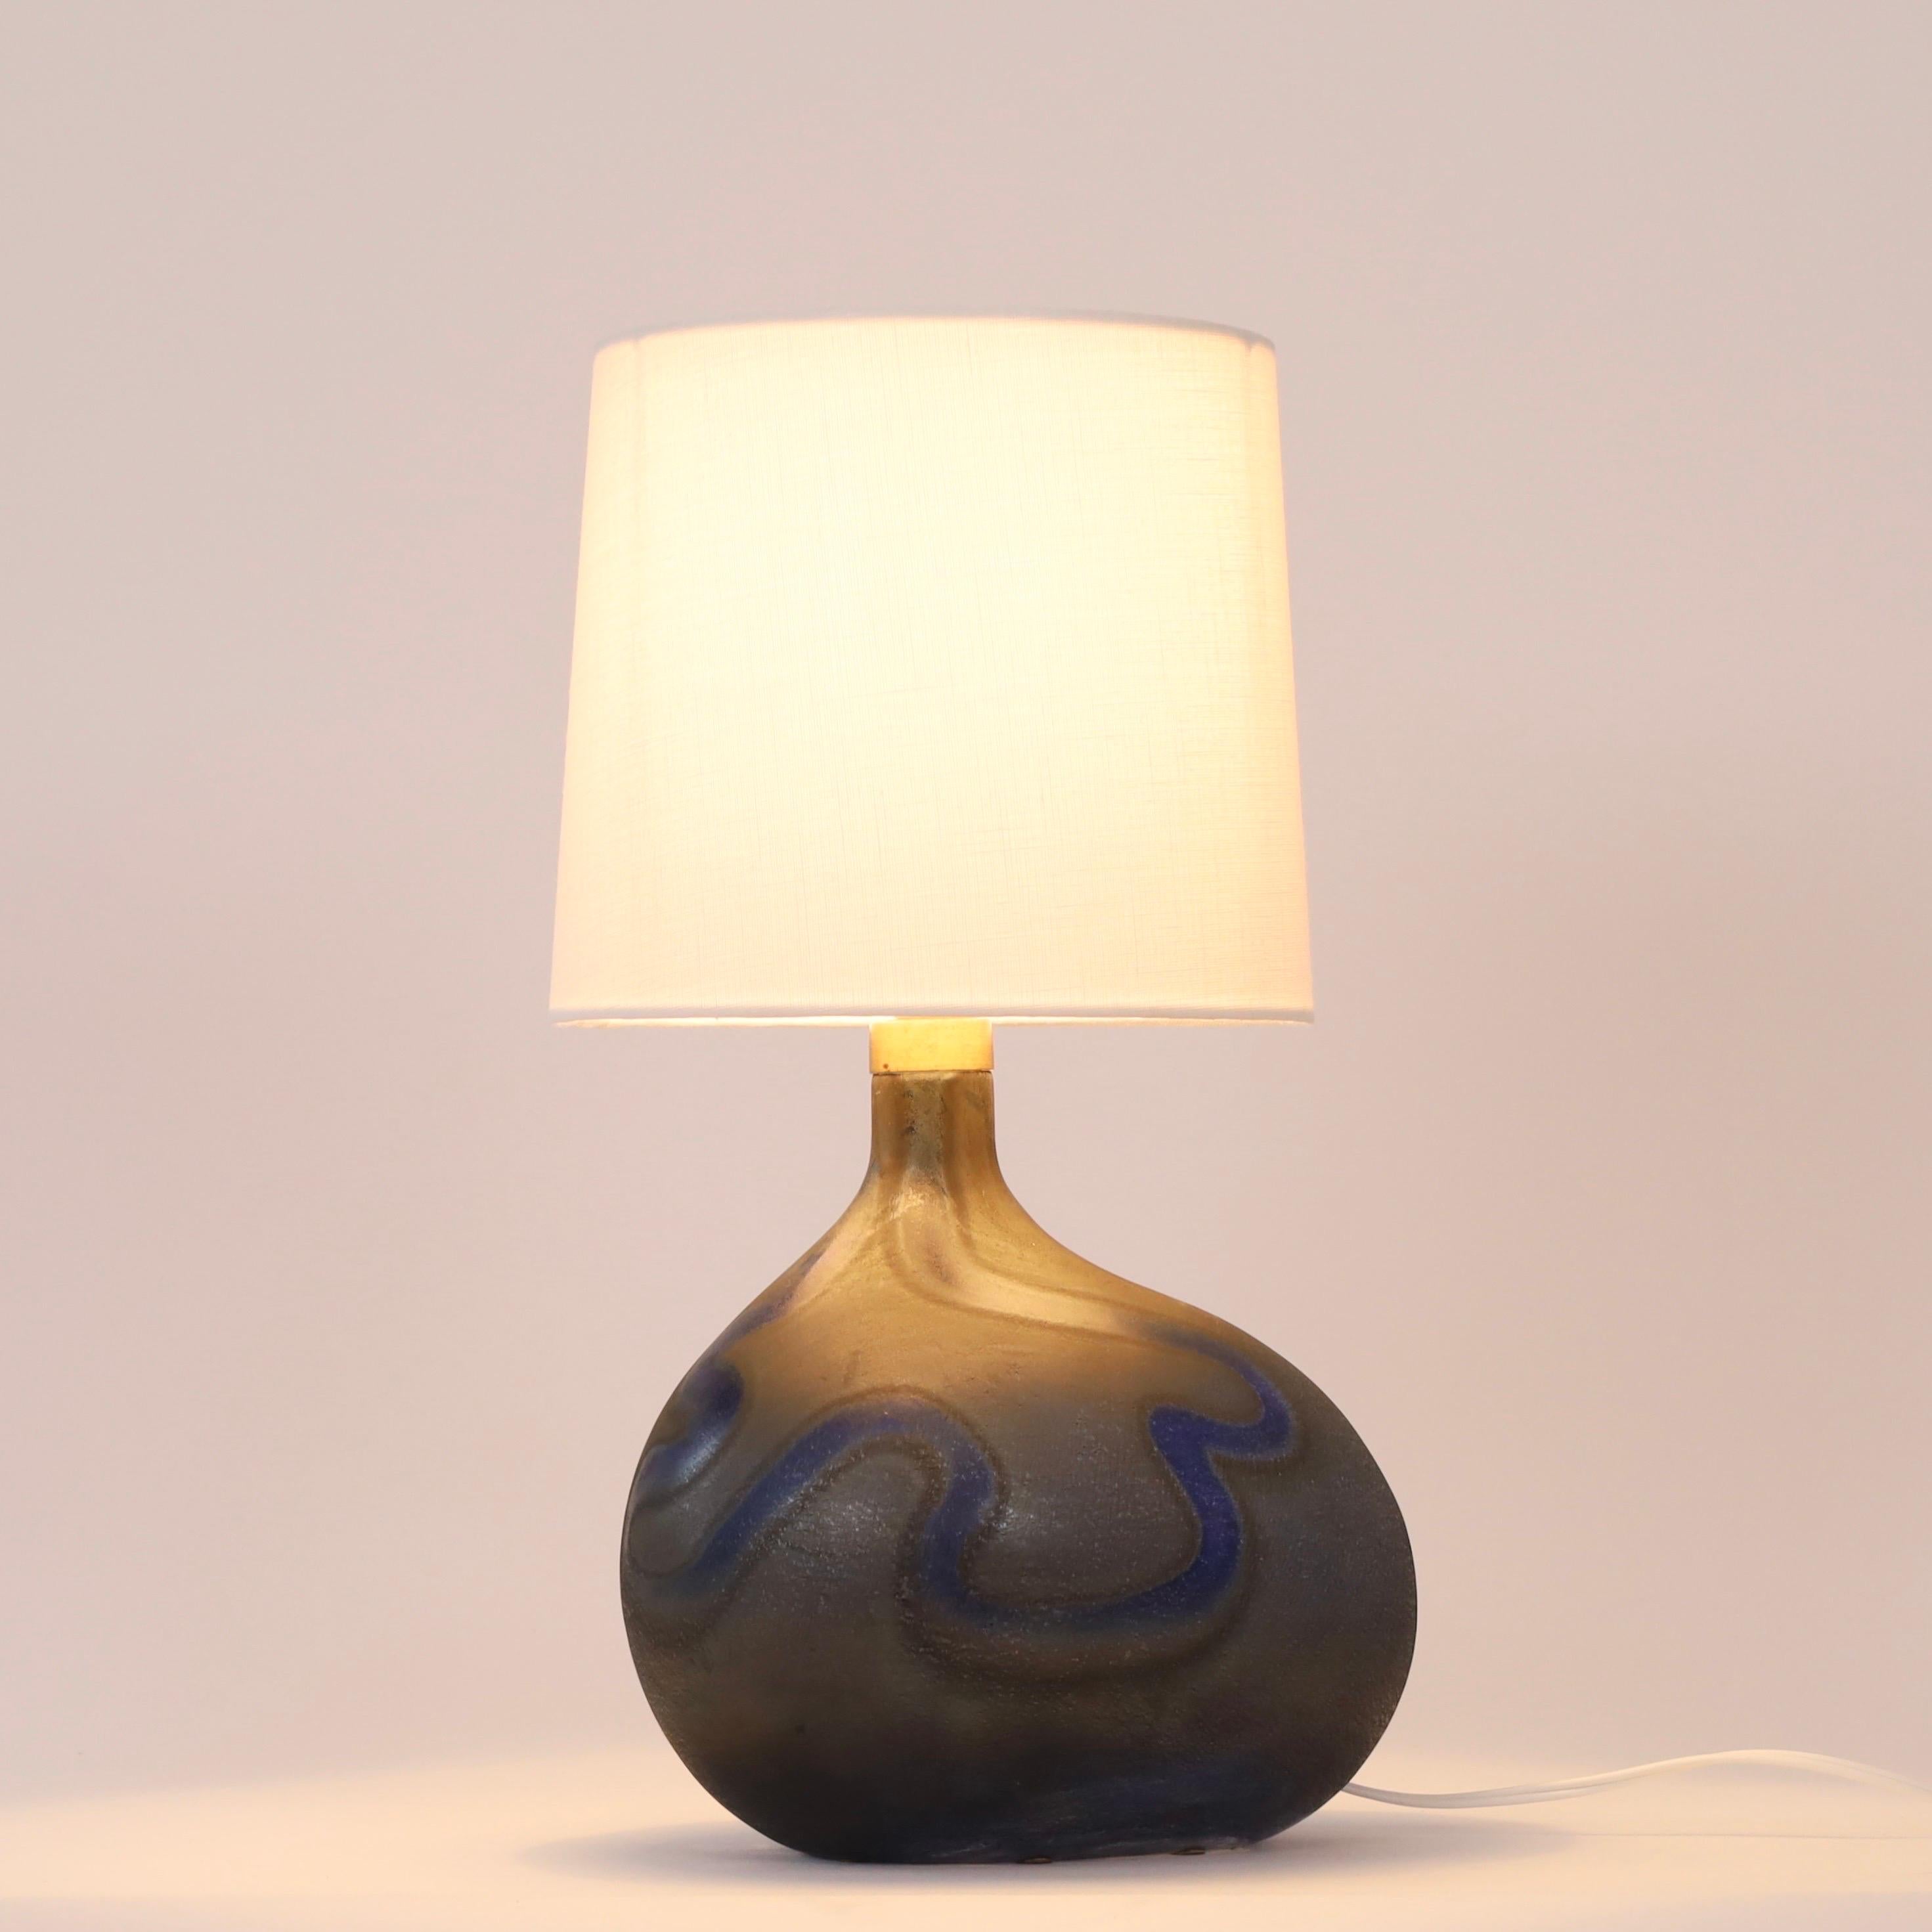 Late 20th Century Danish Modern Lamp Art by Michael Bang for Holmegaard, 1970s, Denmark For Sale